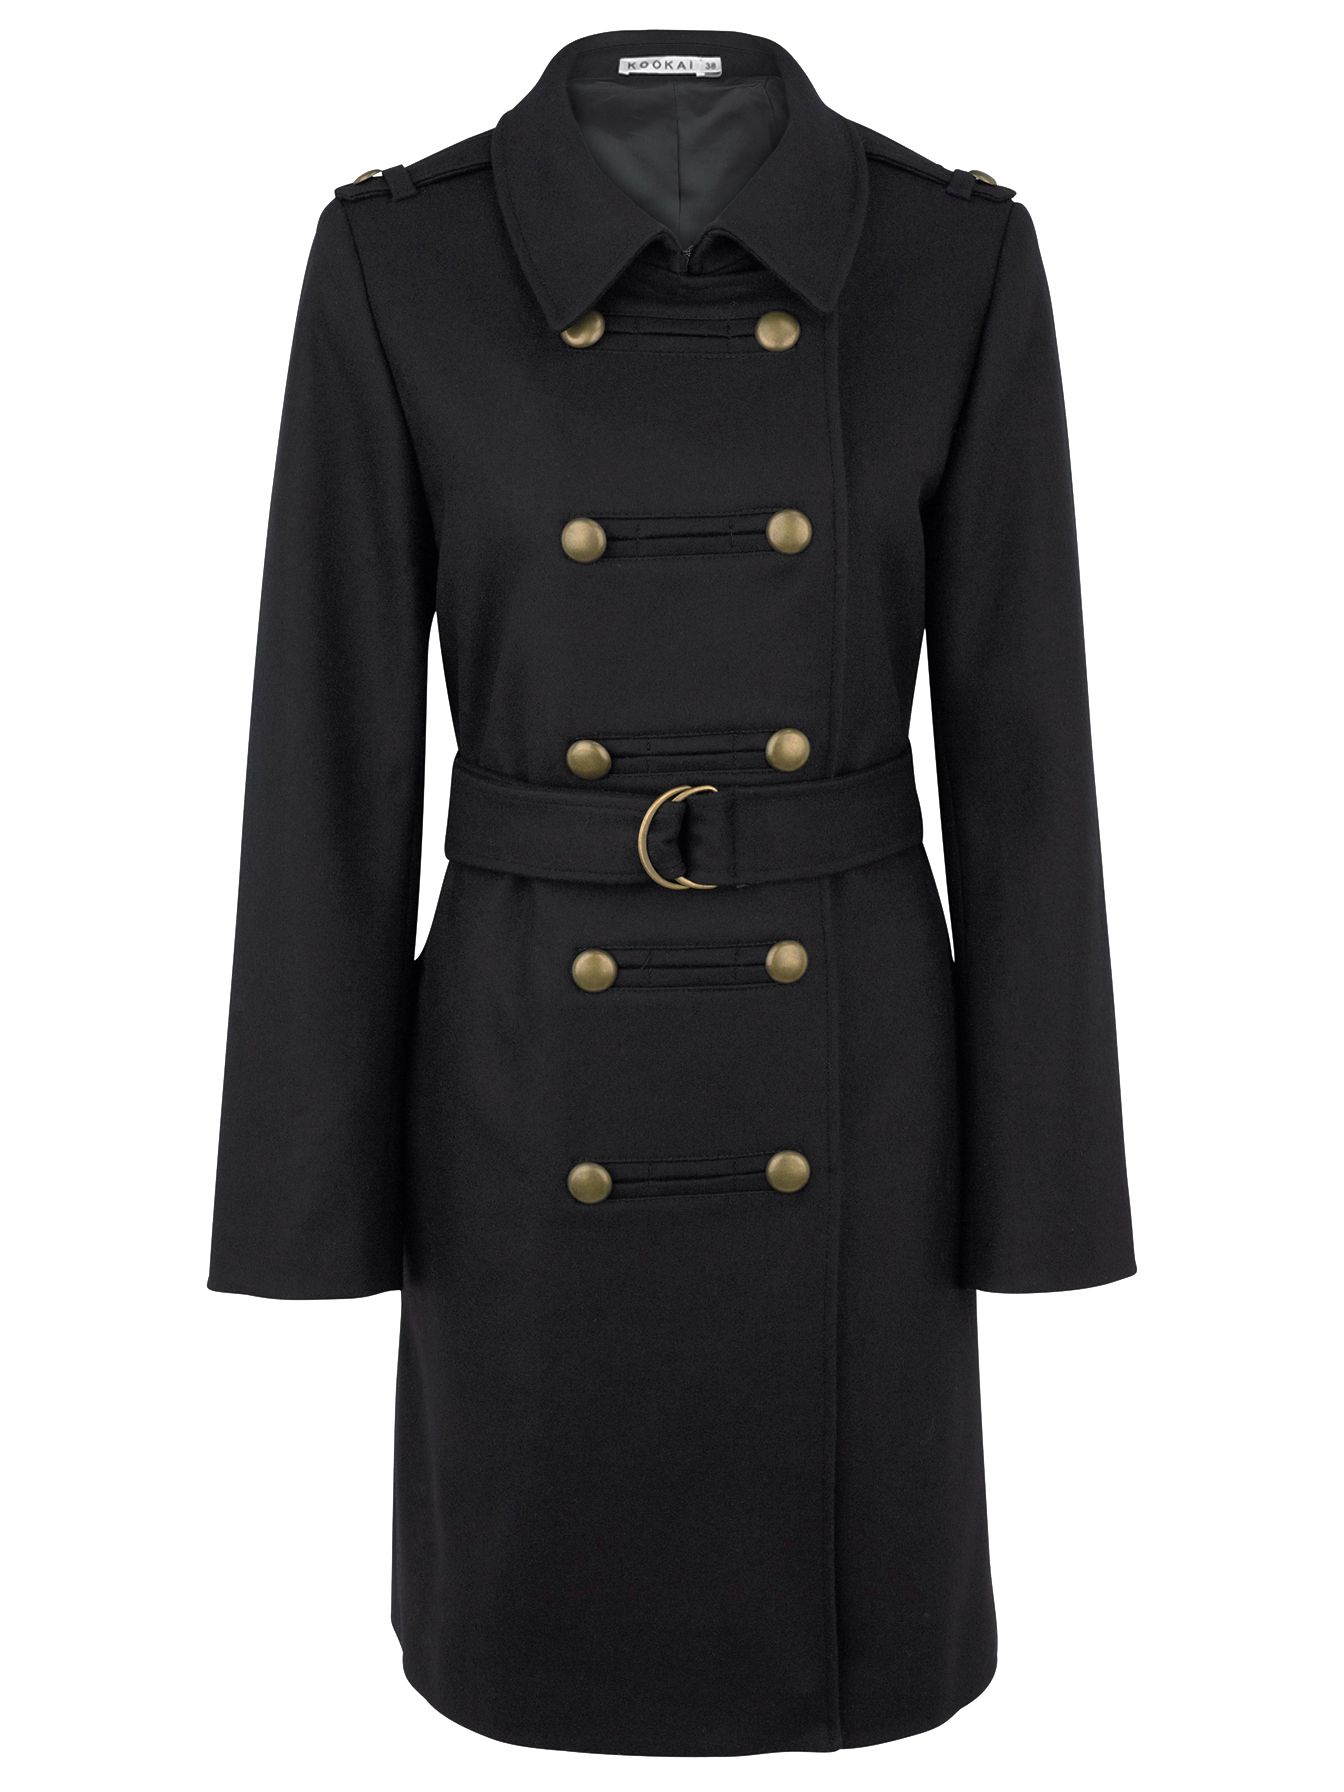 Kookai Double Breasted Military Trench, Black at John Lewis